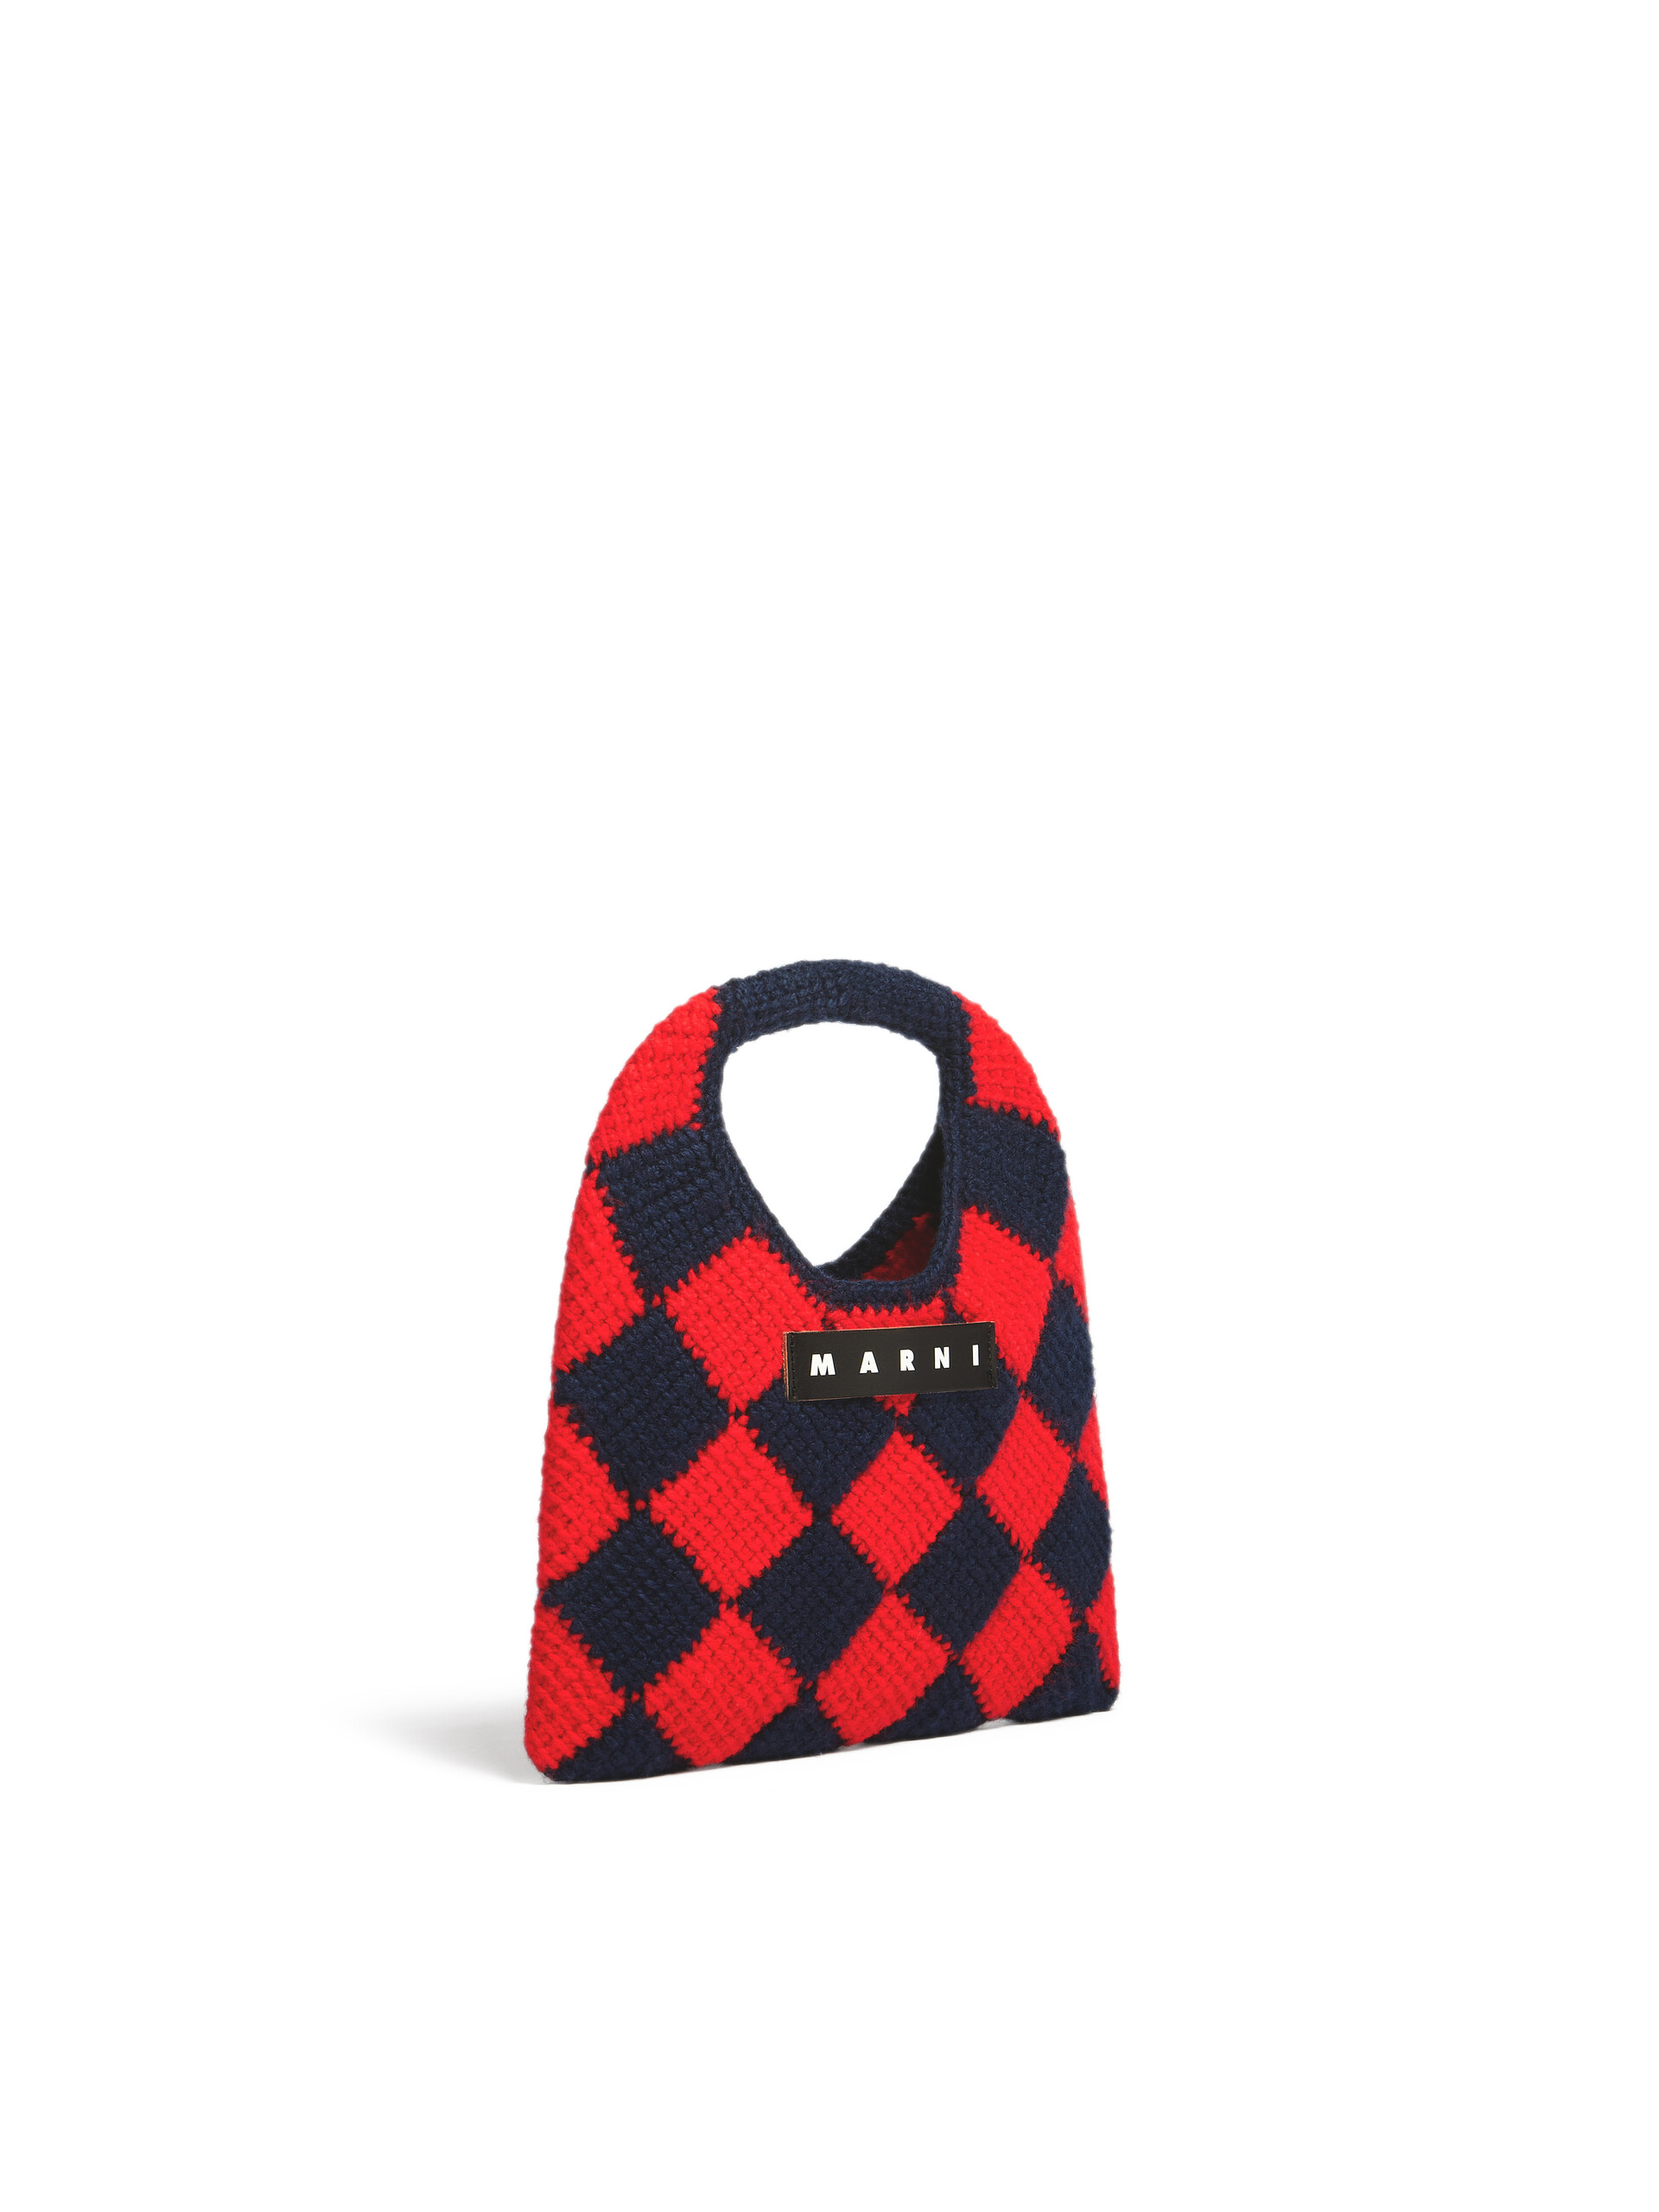 MARNI MARKET DIAMOND small bag in blue and red tech wool - Bags - Image 2